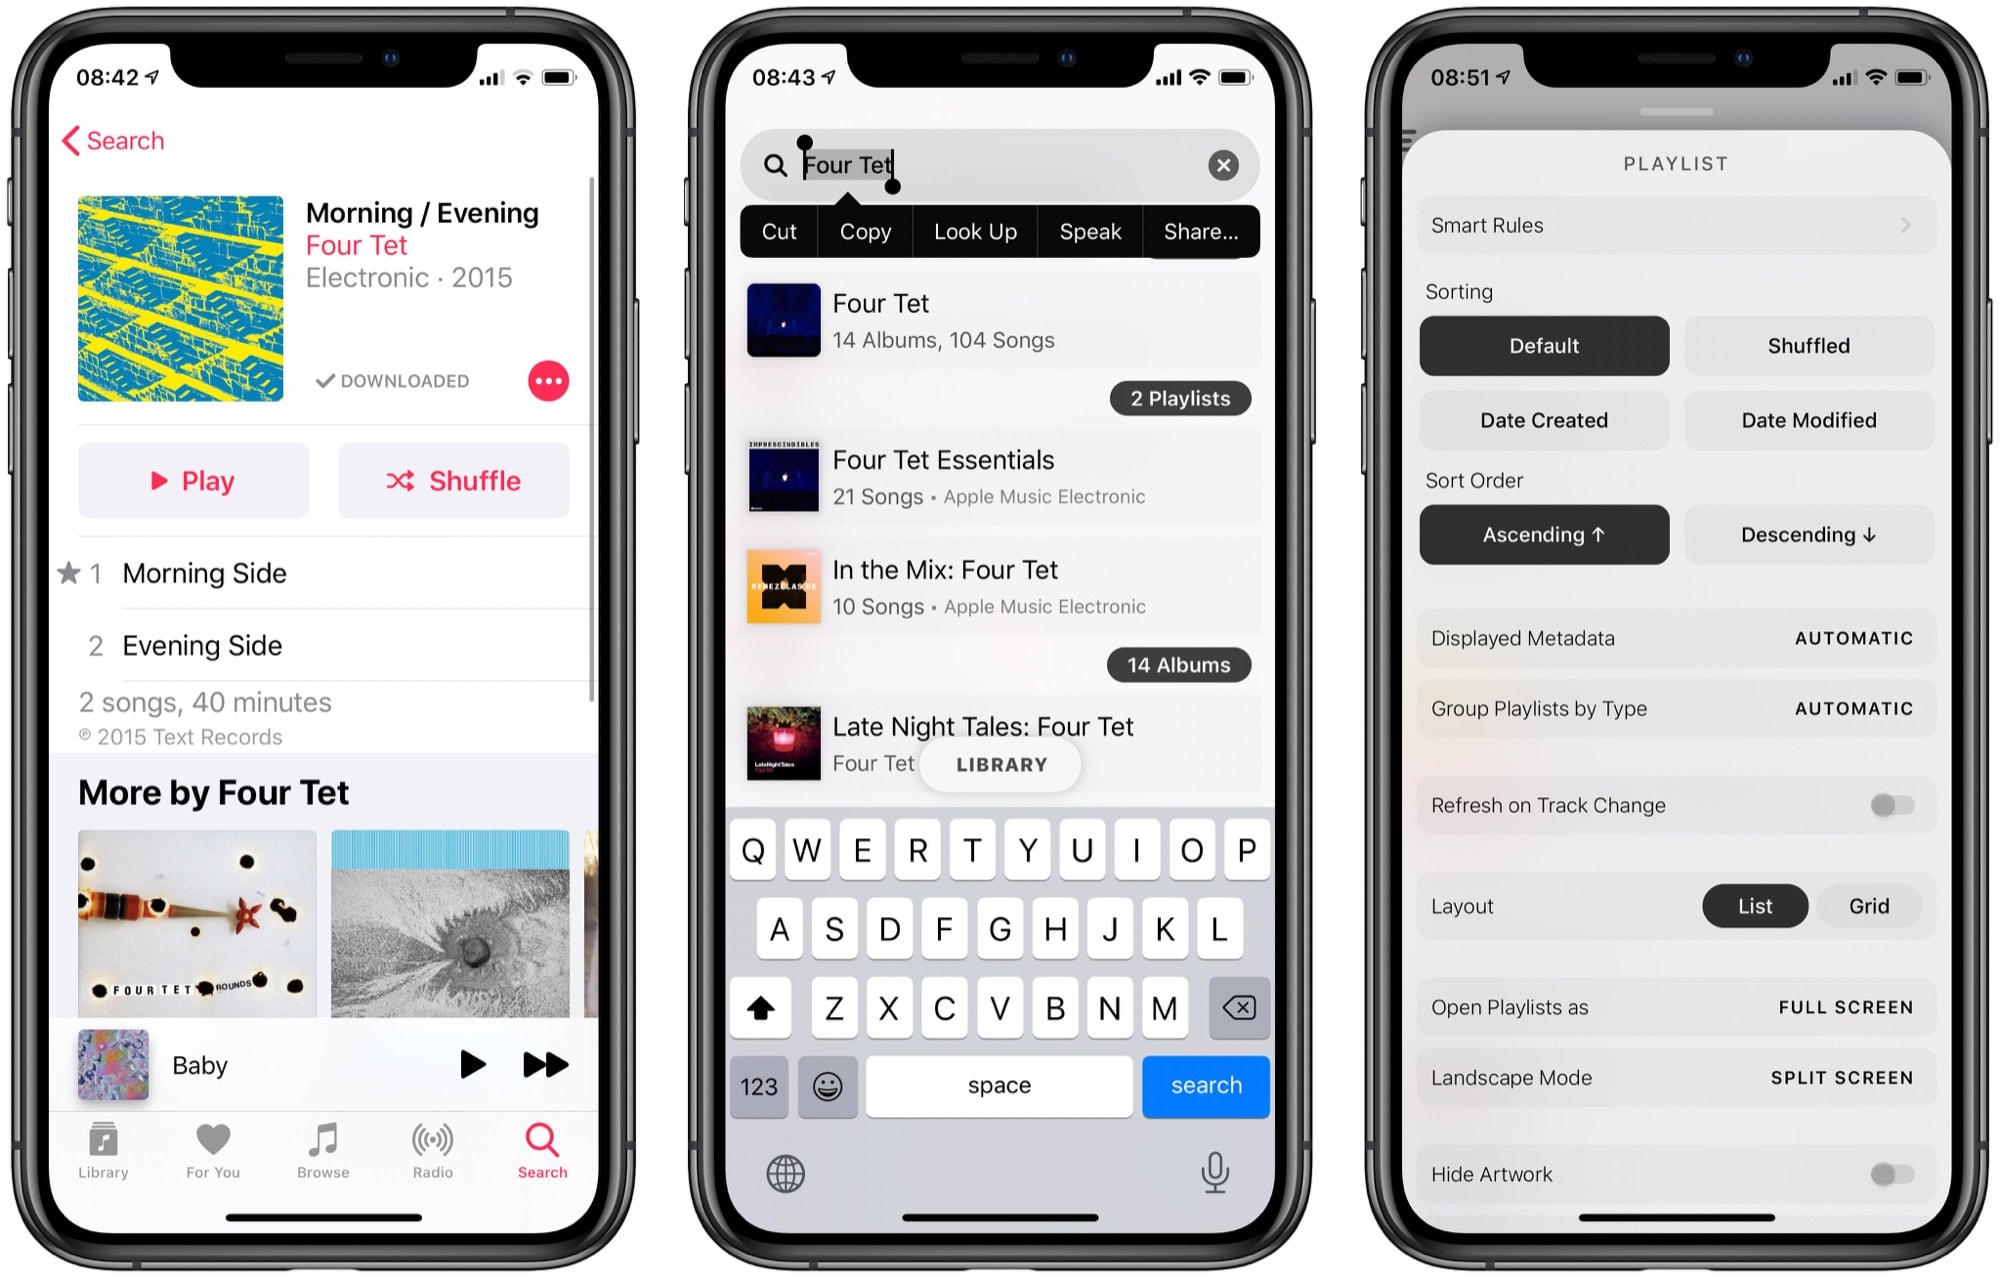 Apple Music search, Marvis search, and customizable views.